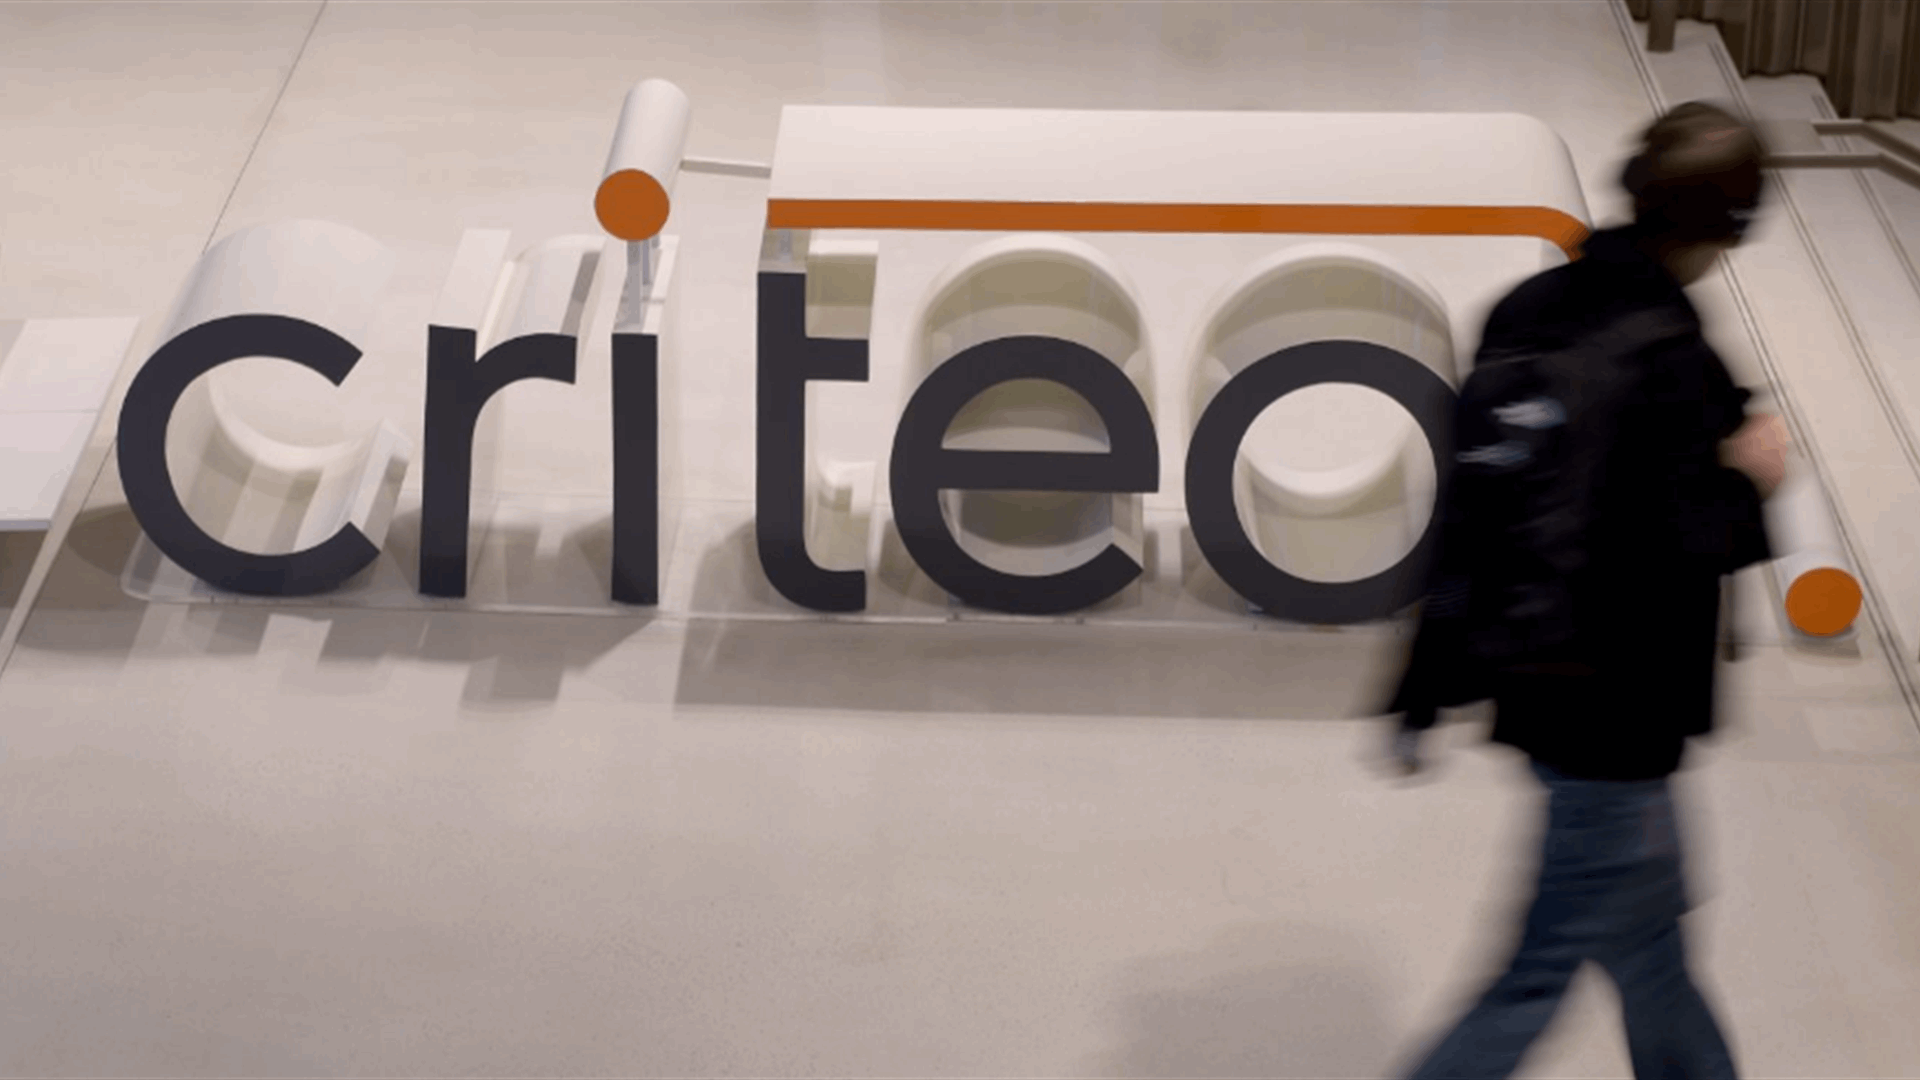 Adtech giant Criteo hit with revised &euro;40M fine by French data privacy body over GDPR breaches